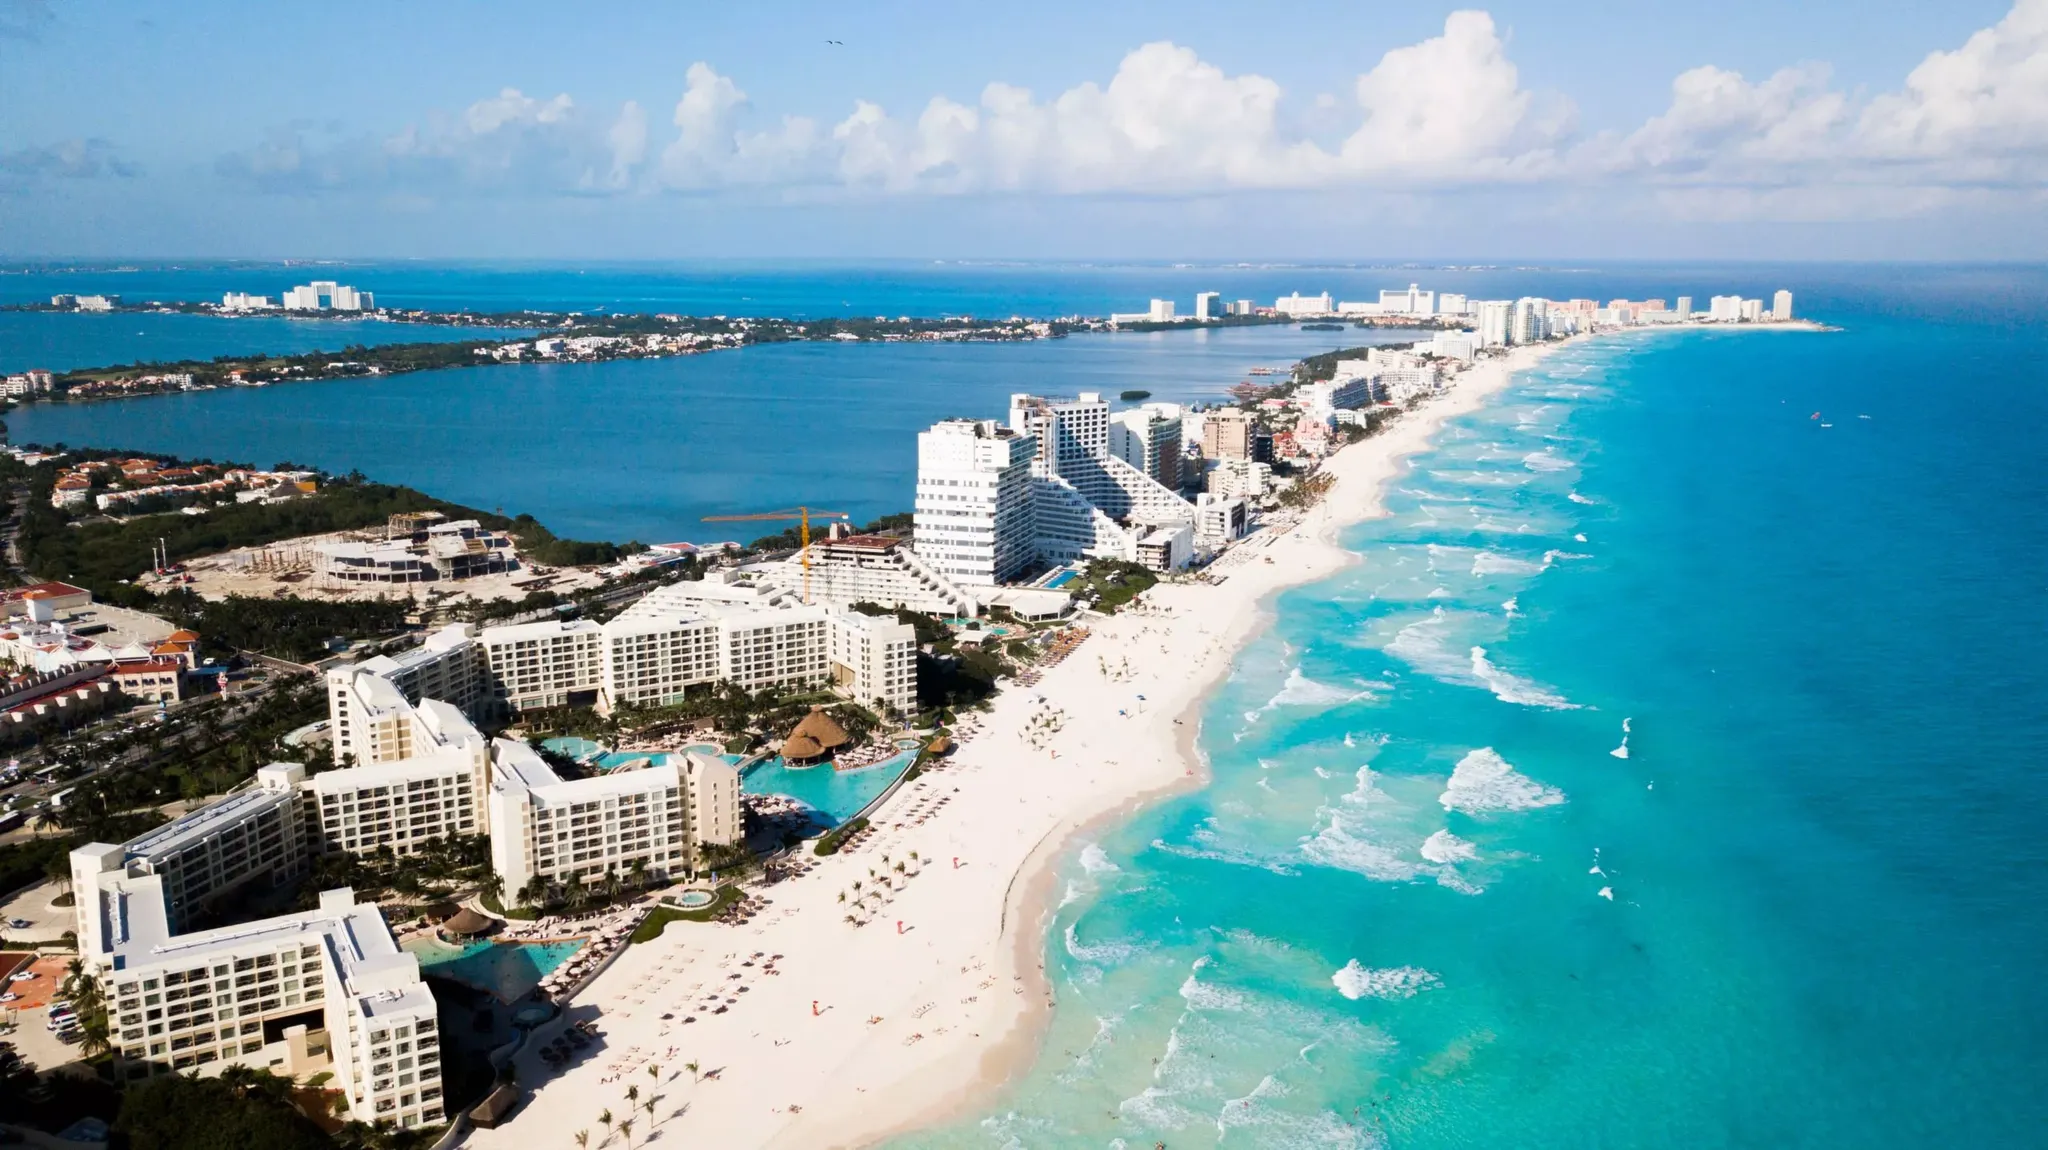 Cancun | Quintana Roo Region, Mexico - Rated 7.1